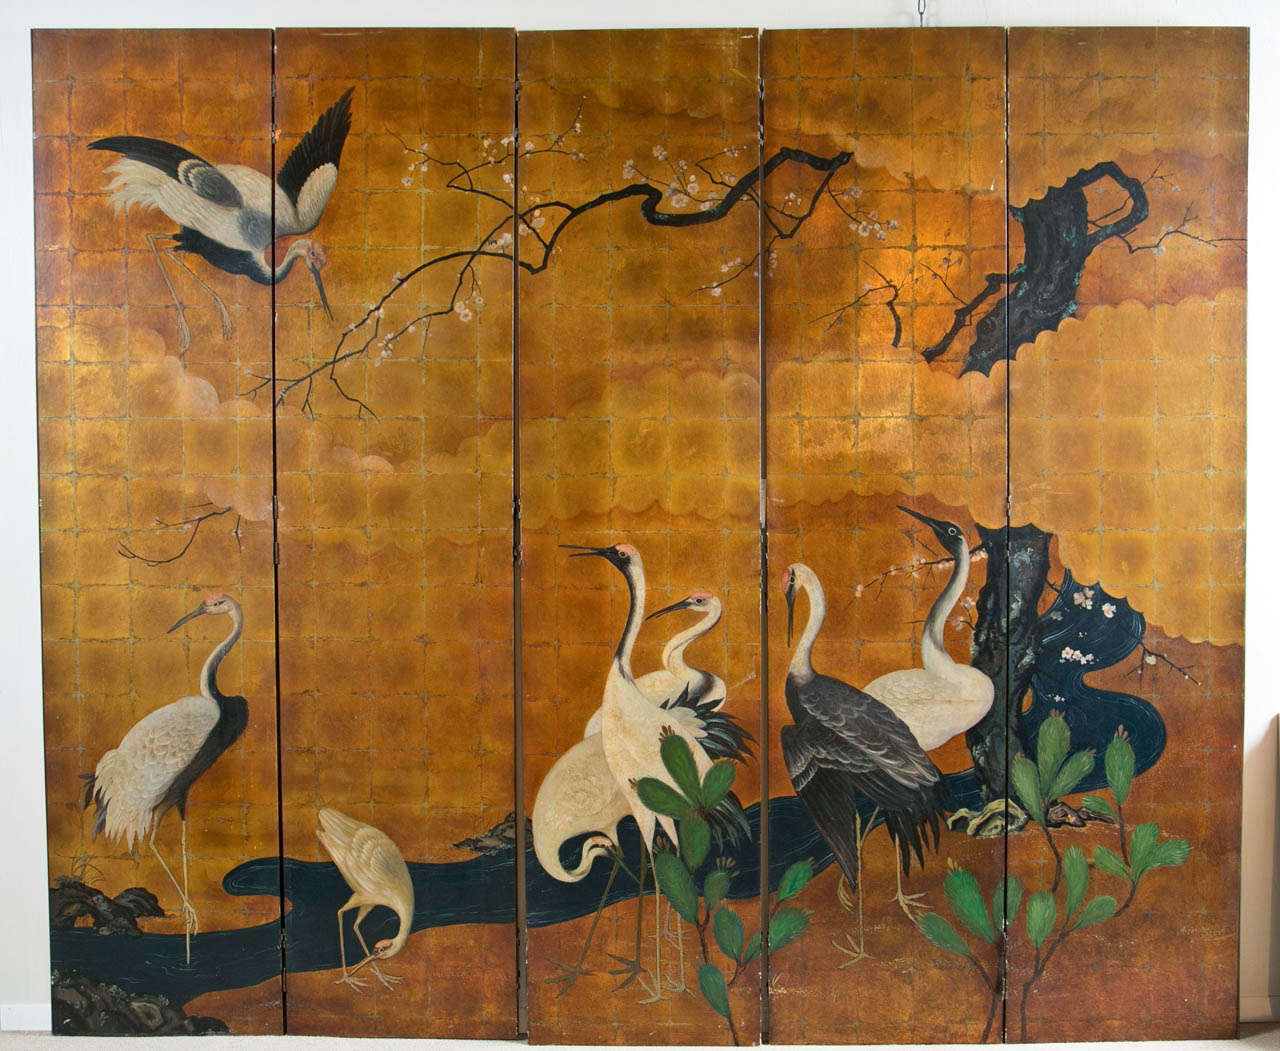 A stunning hand painted Japanese screen with five panels depicting images of cranes.